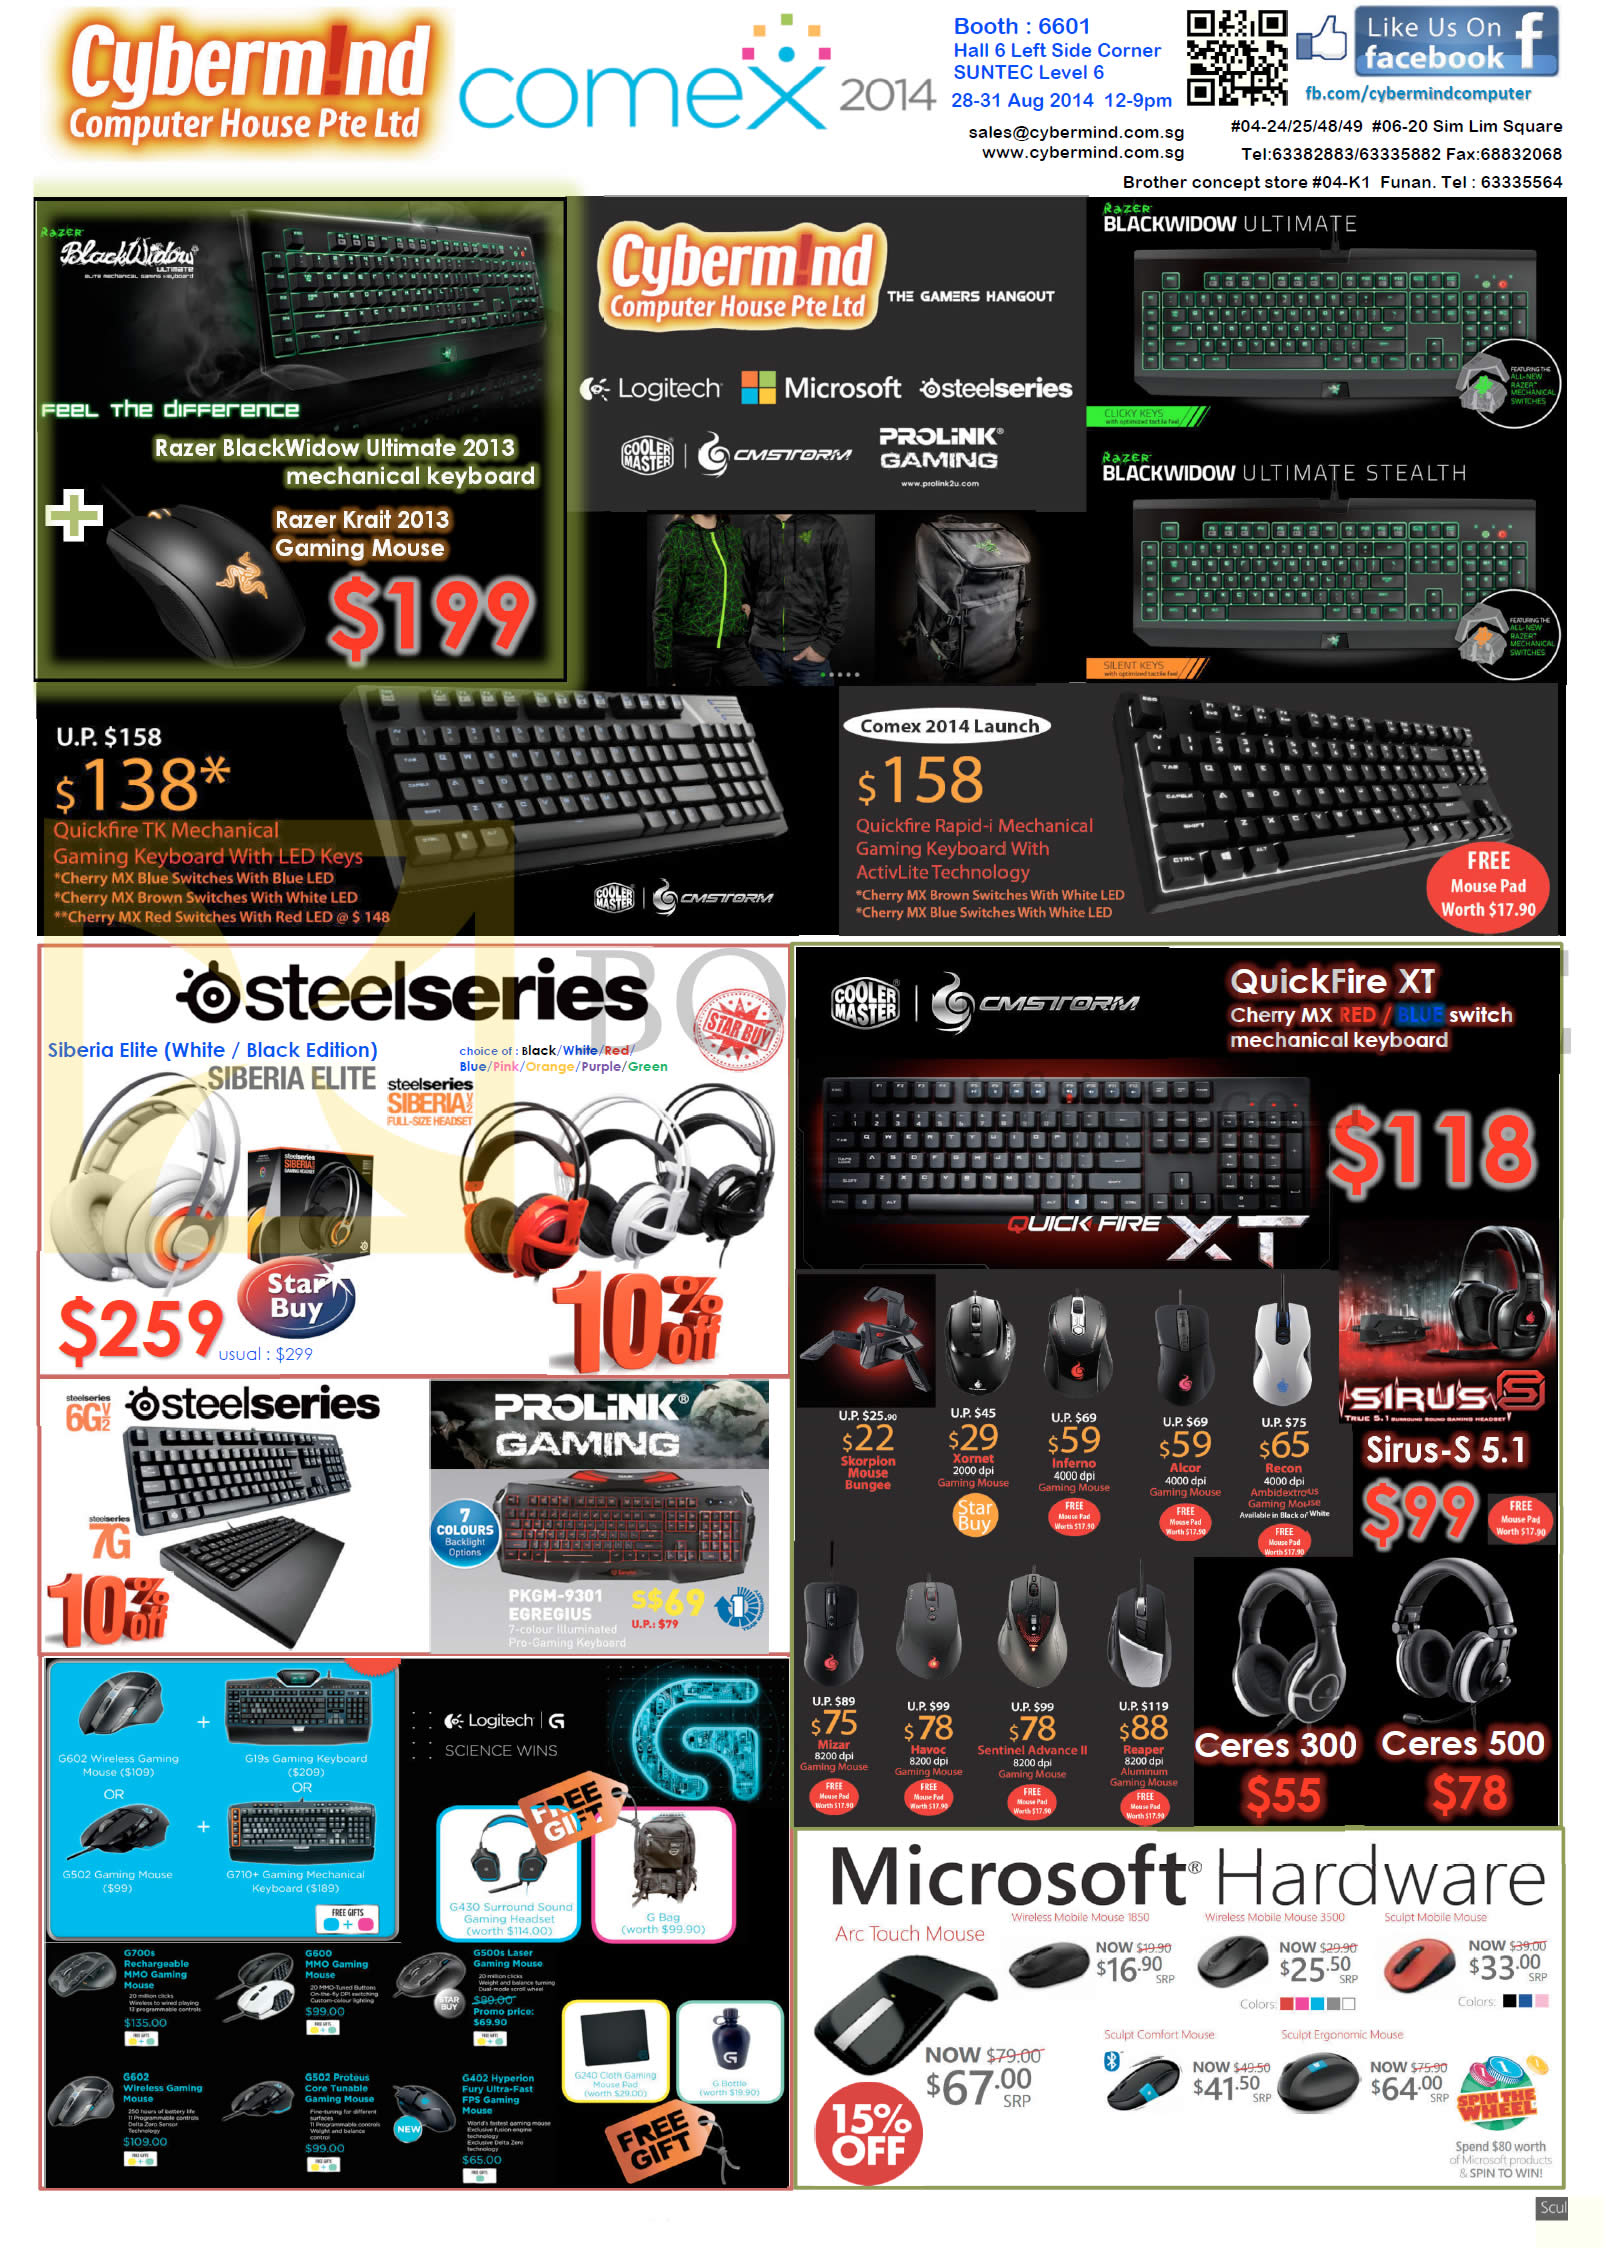 COMEX 2014 price list image brochure of Cybermind Razer Keyboards Mouse, Steelseries Headphones Siberia, Prolink Gaming, Microsoft Arc Touch Sculpt, Cooler Master QuickFire XT